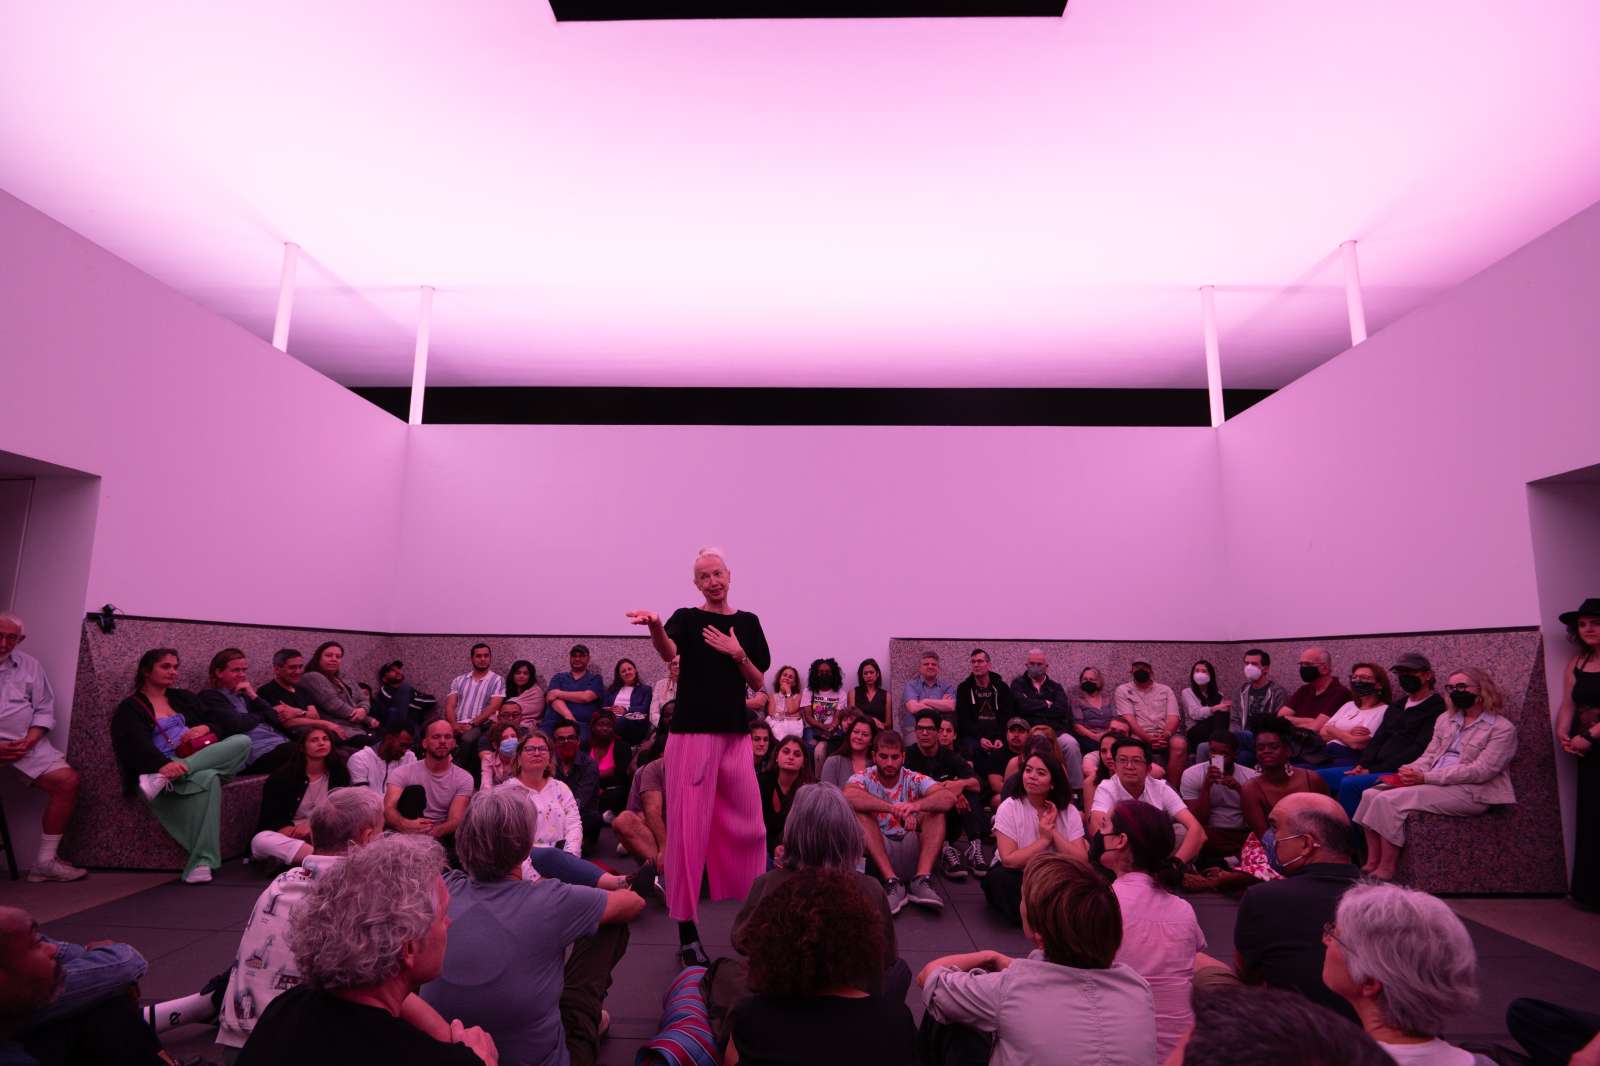 Karole Armitage speaking to an audience in the skyspace wearing a black shirt and pink pants.